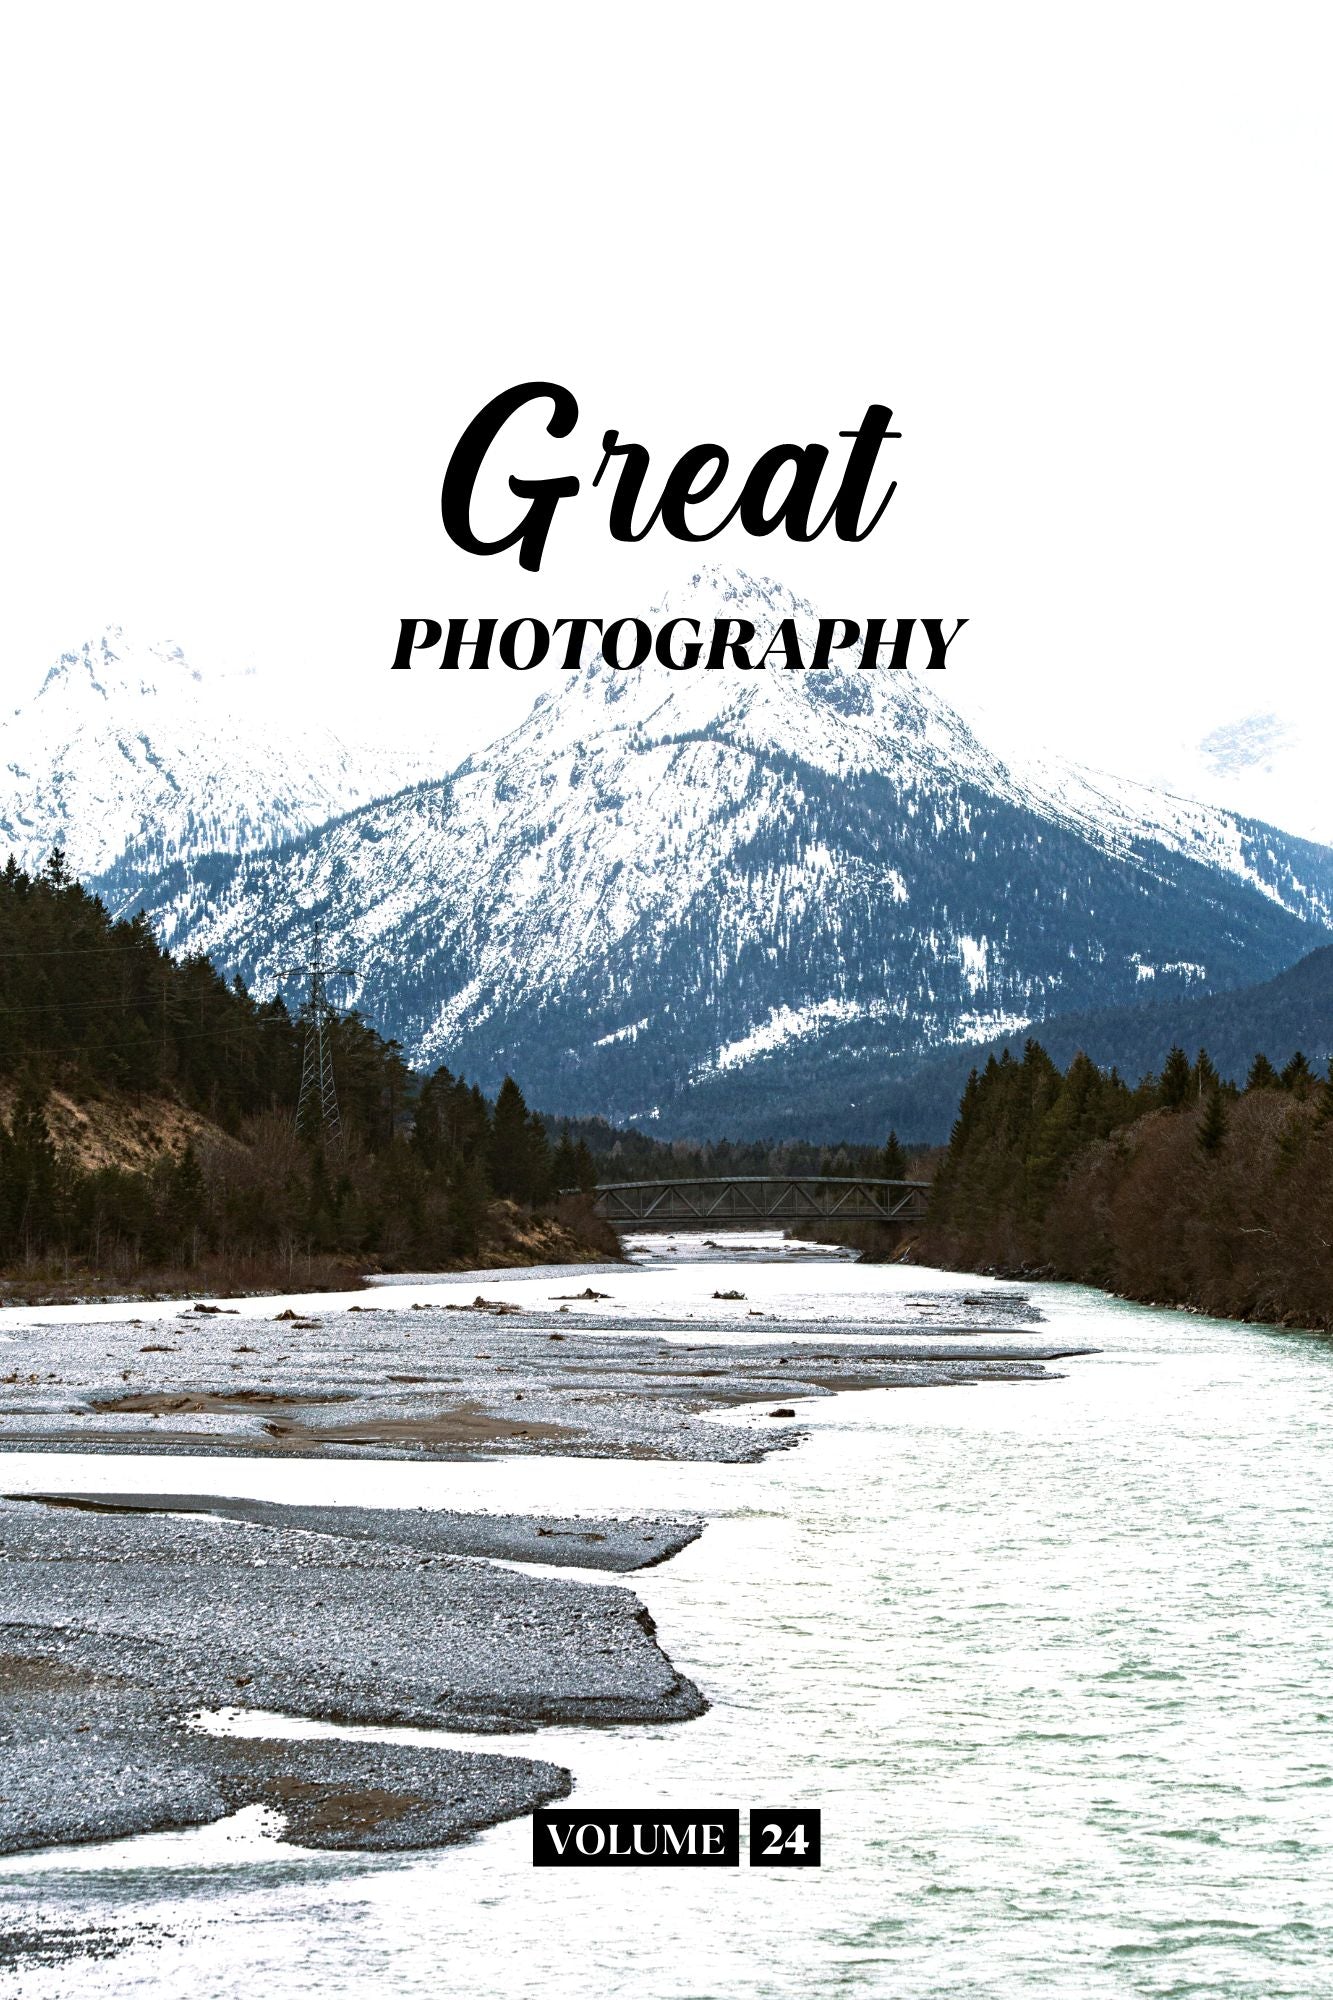 Great Photography Volume 24 (Physical Book Pre-Order)